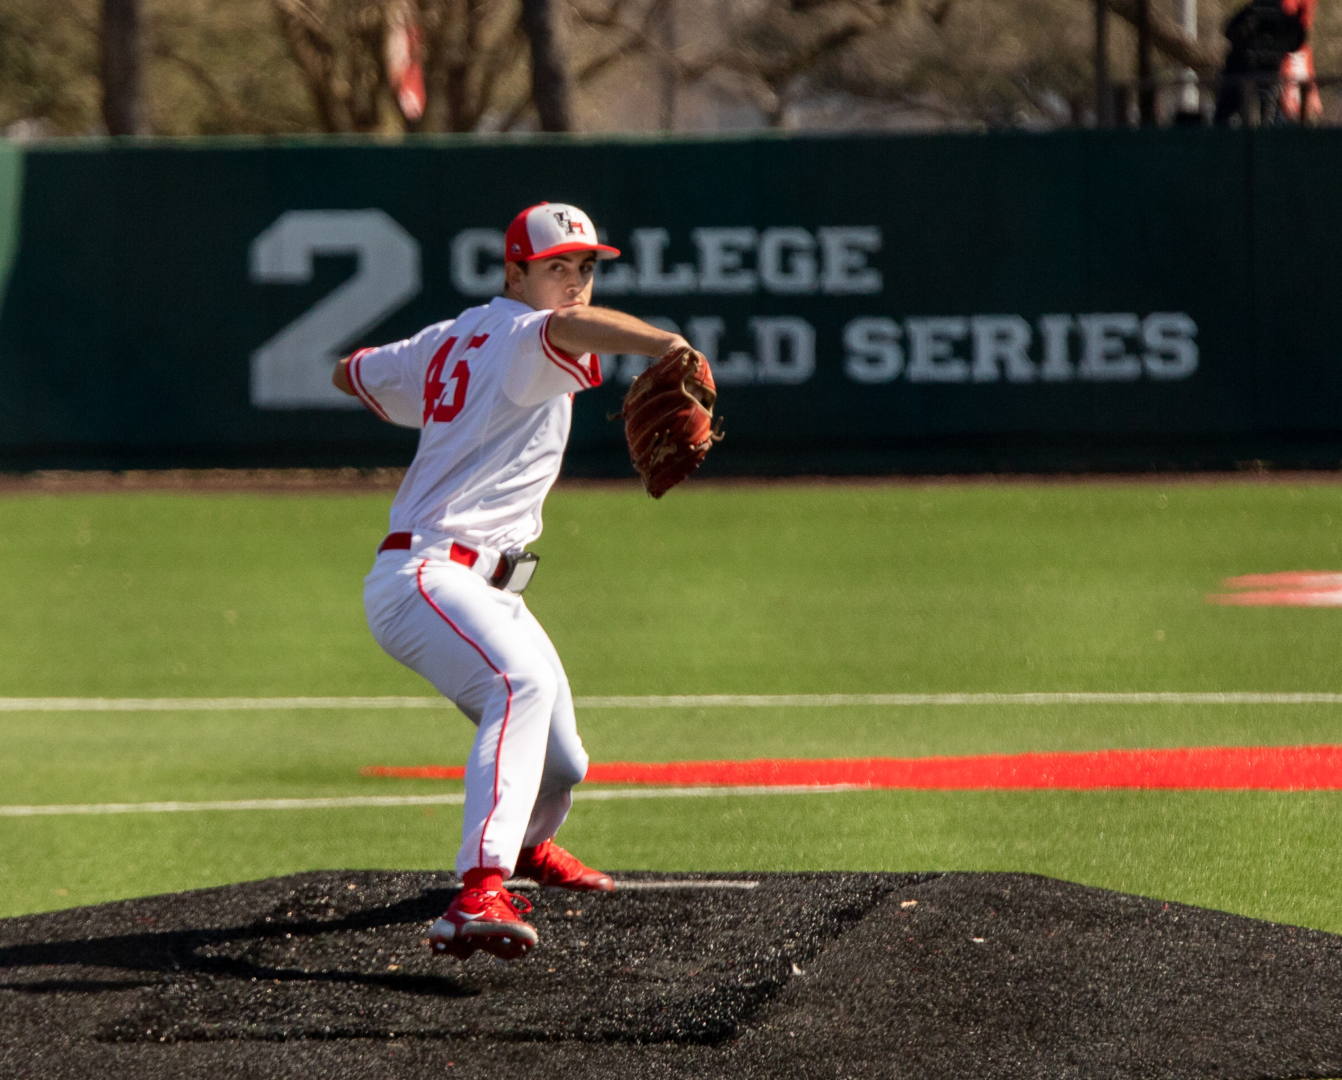 Junior left-handed pitcher Robert Gasser pitched five innings allowing zero earned runs while striking out seven in UH baseball's season-opening win over TSU | Andy Yanez| The Cougar